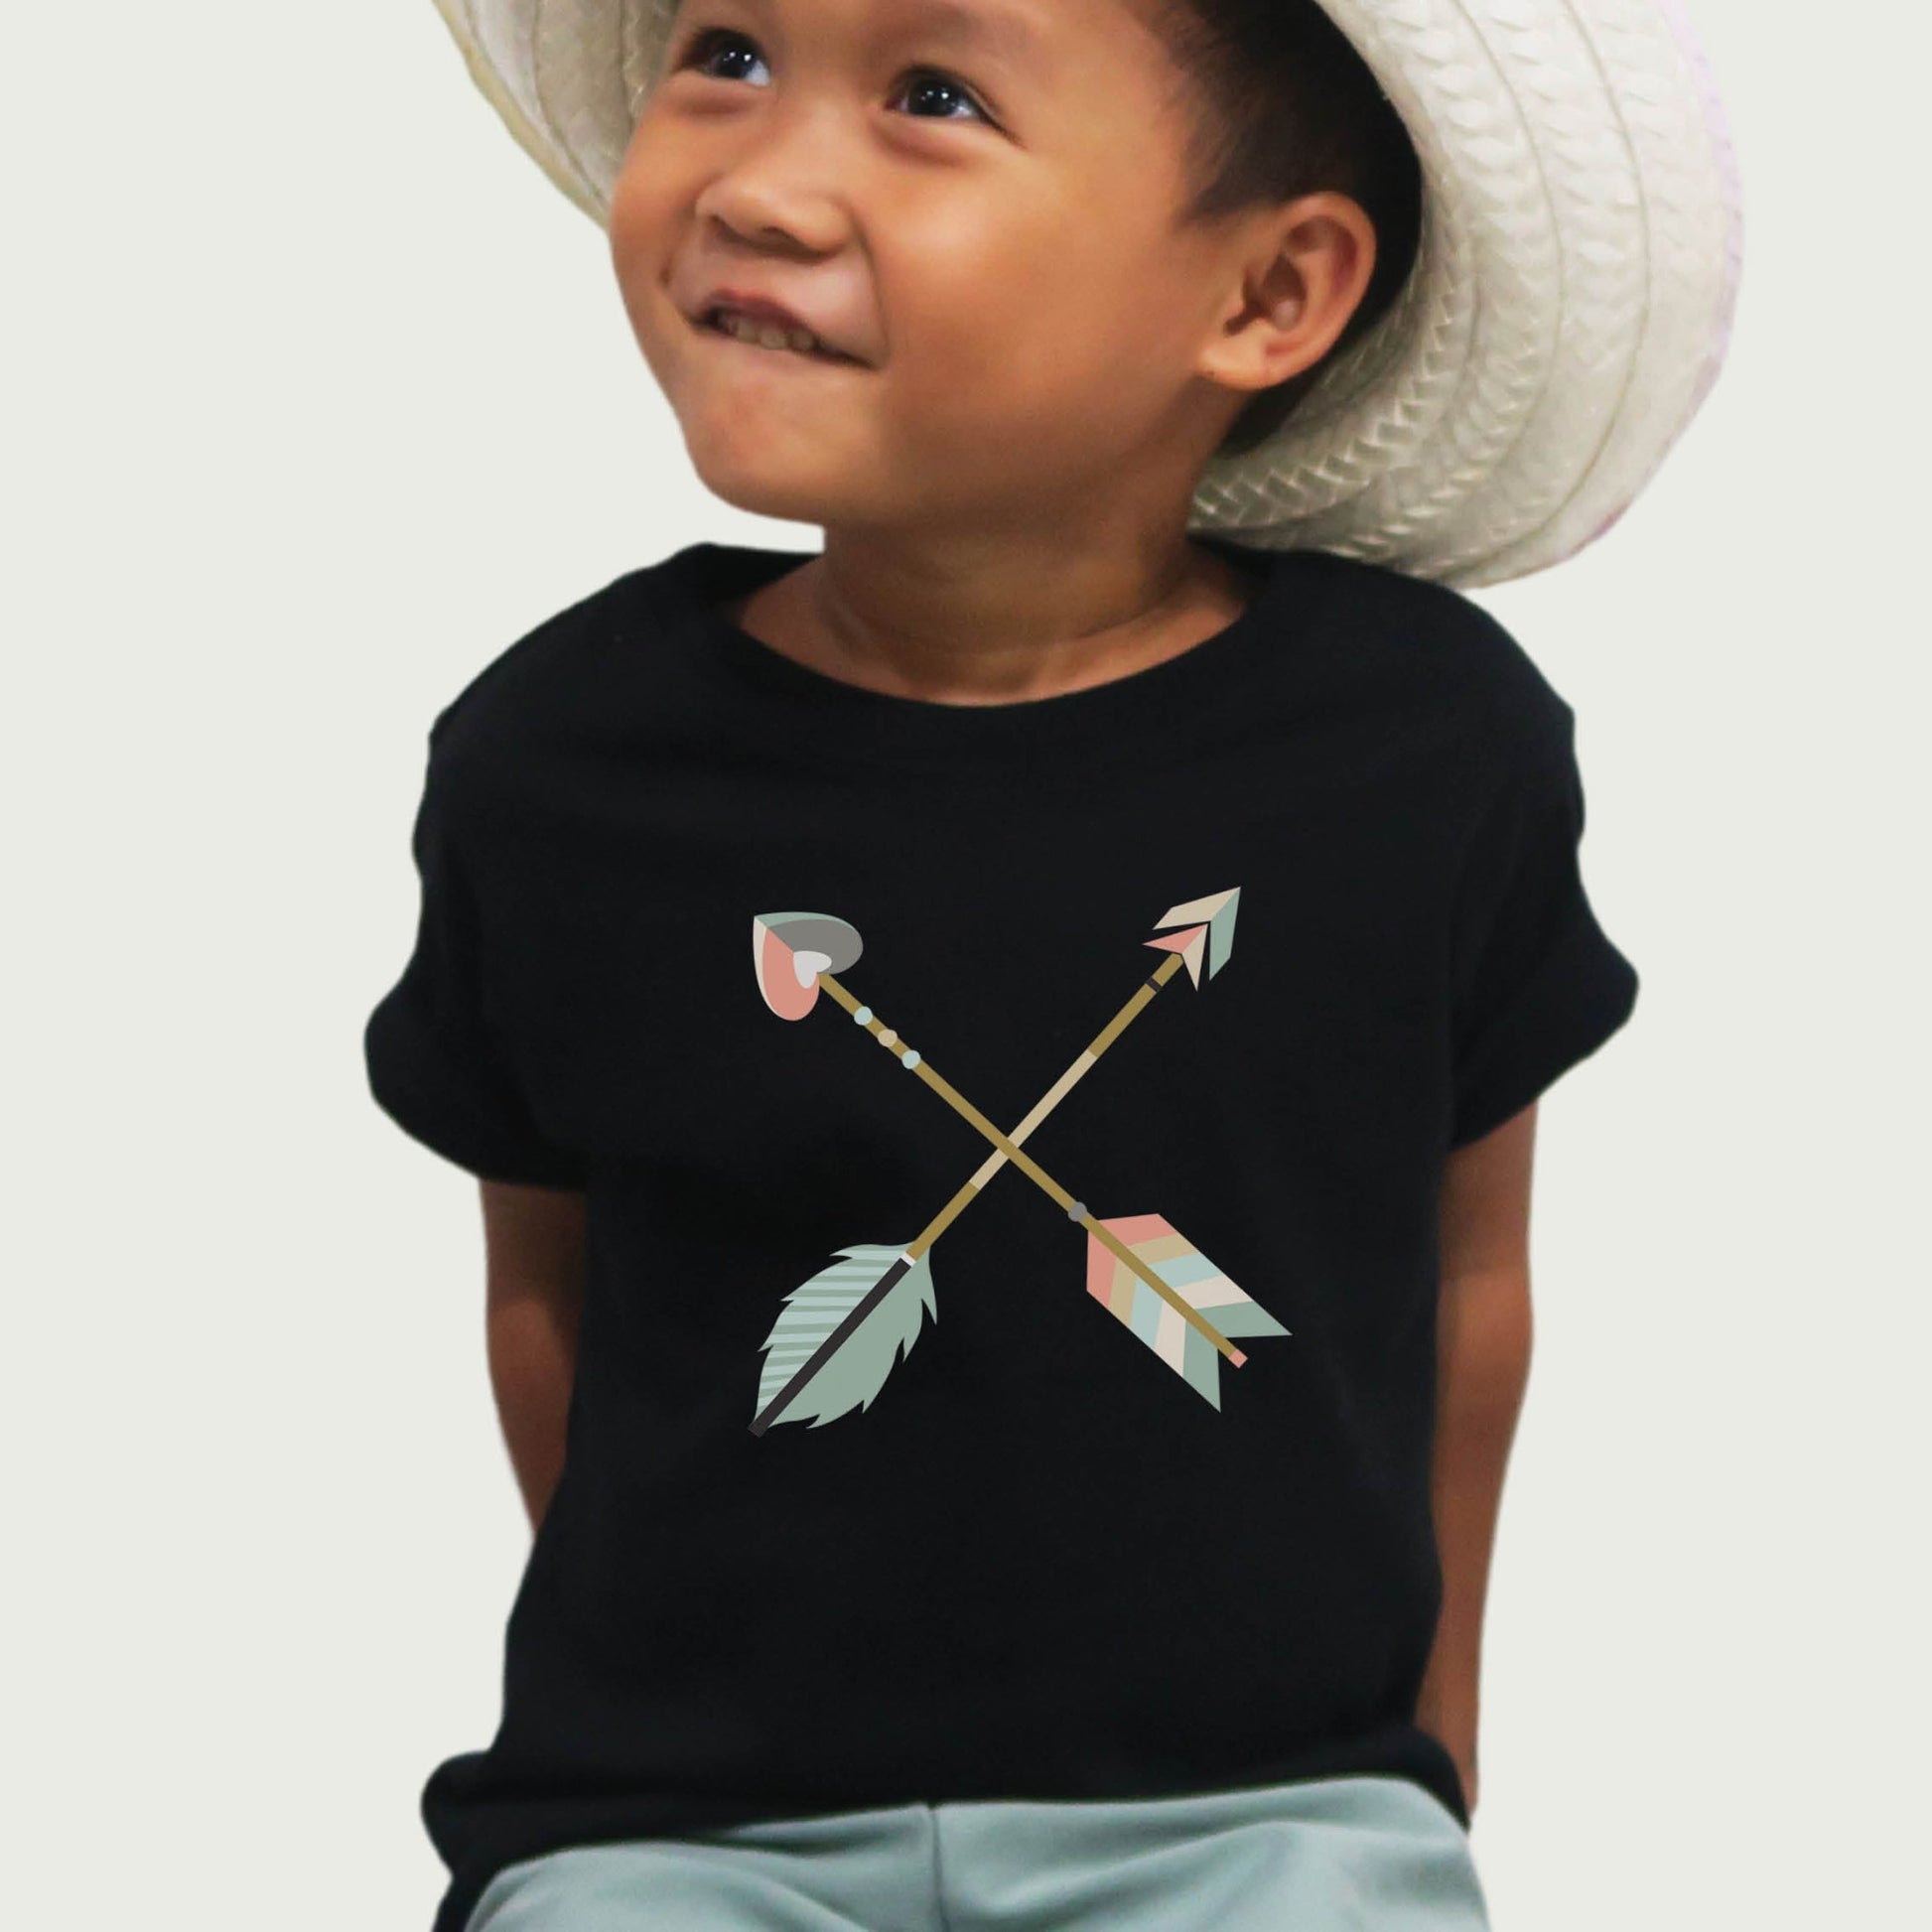 Black toddler size t-shirt with pastel criss-cross boho arrows, one with a heart on the end, matching mommy-and-me Christian Mom "Raising Arrows" Psalm 127:4-5 bible verse t-shirt for boys and girls